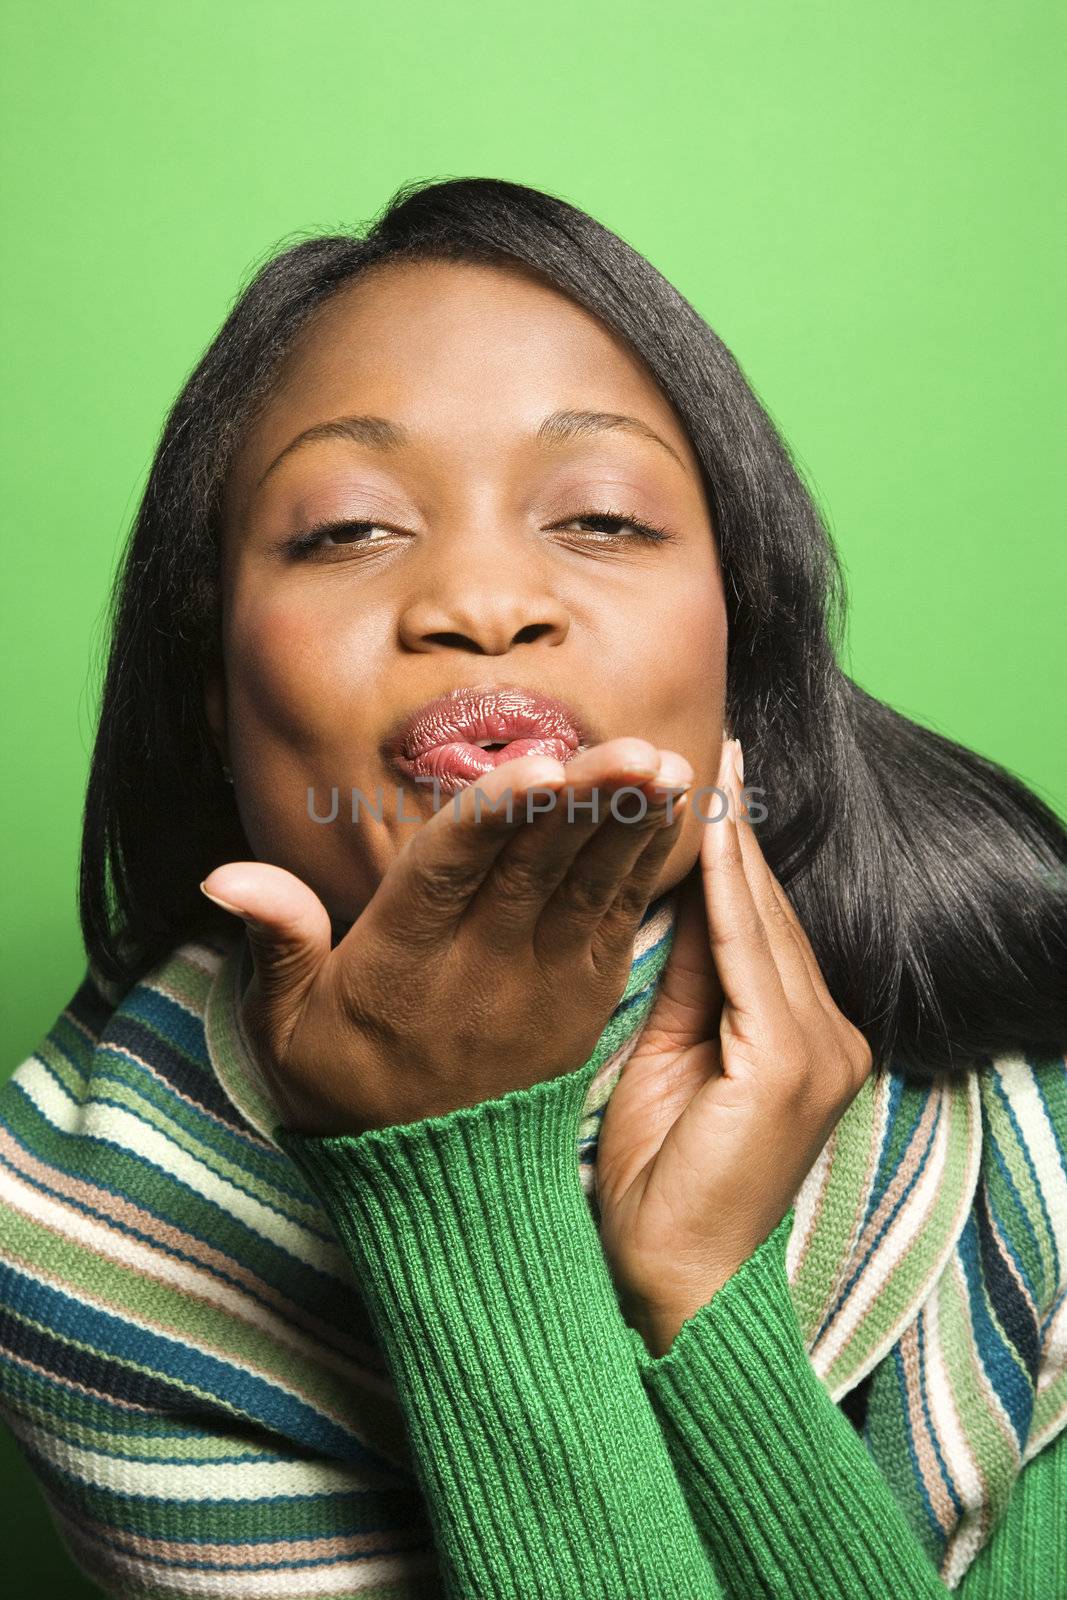 African-American mid-adult woman wearing green scarf on green background blowing kiss at viewer.